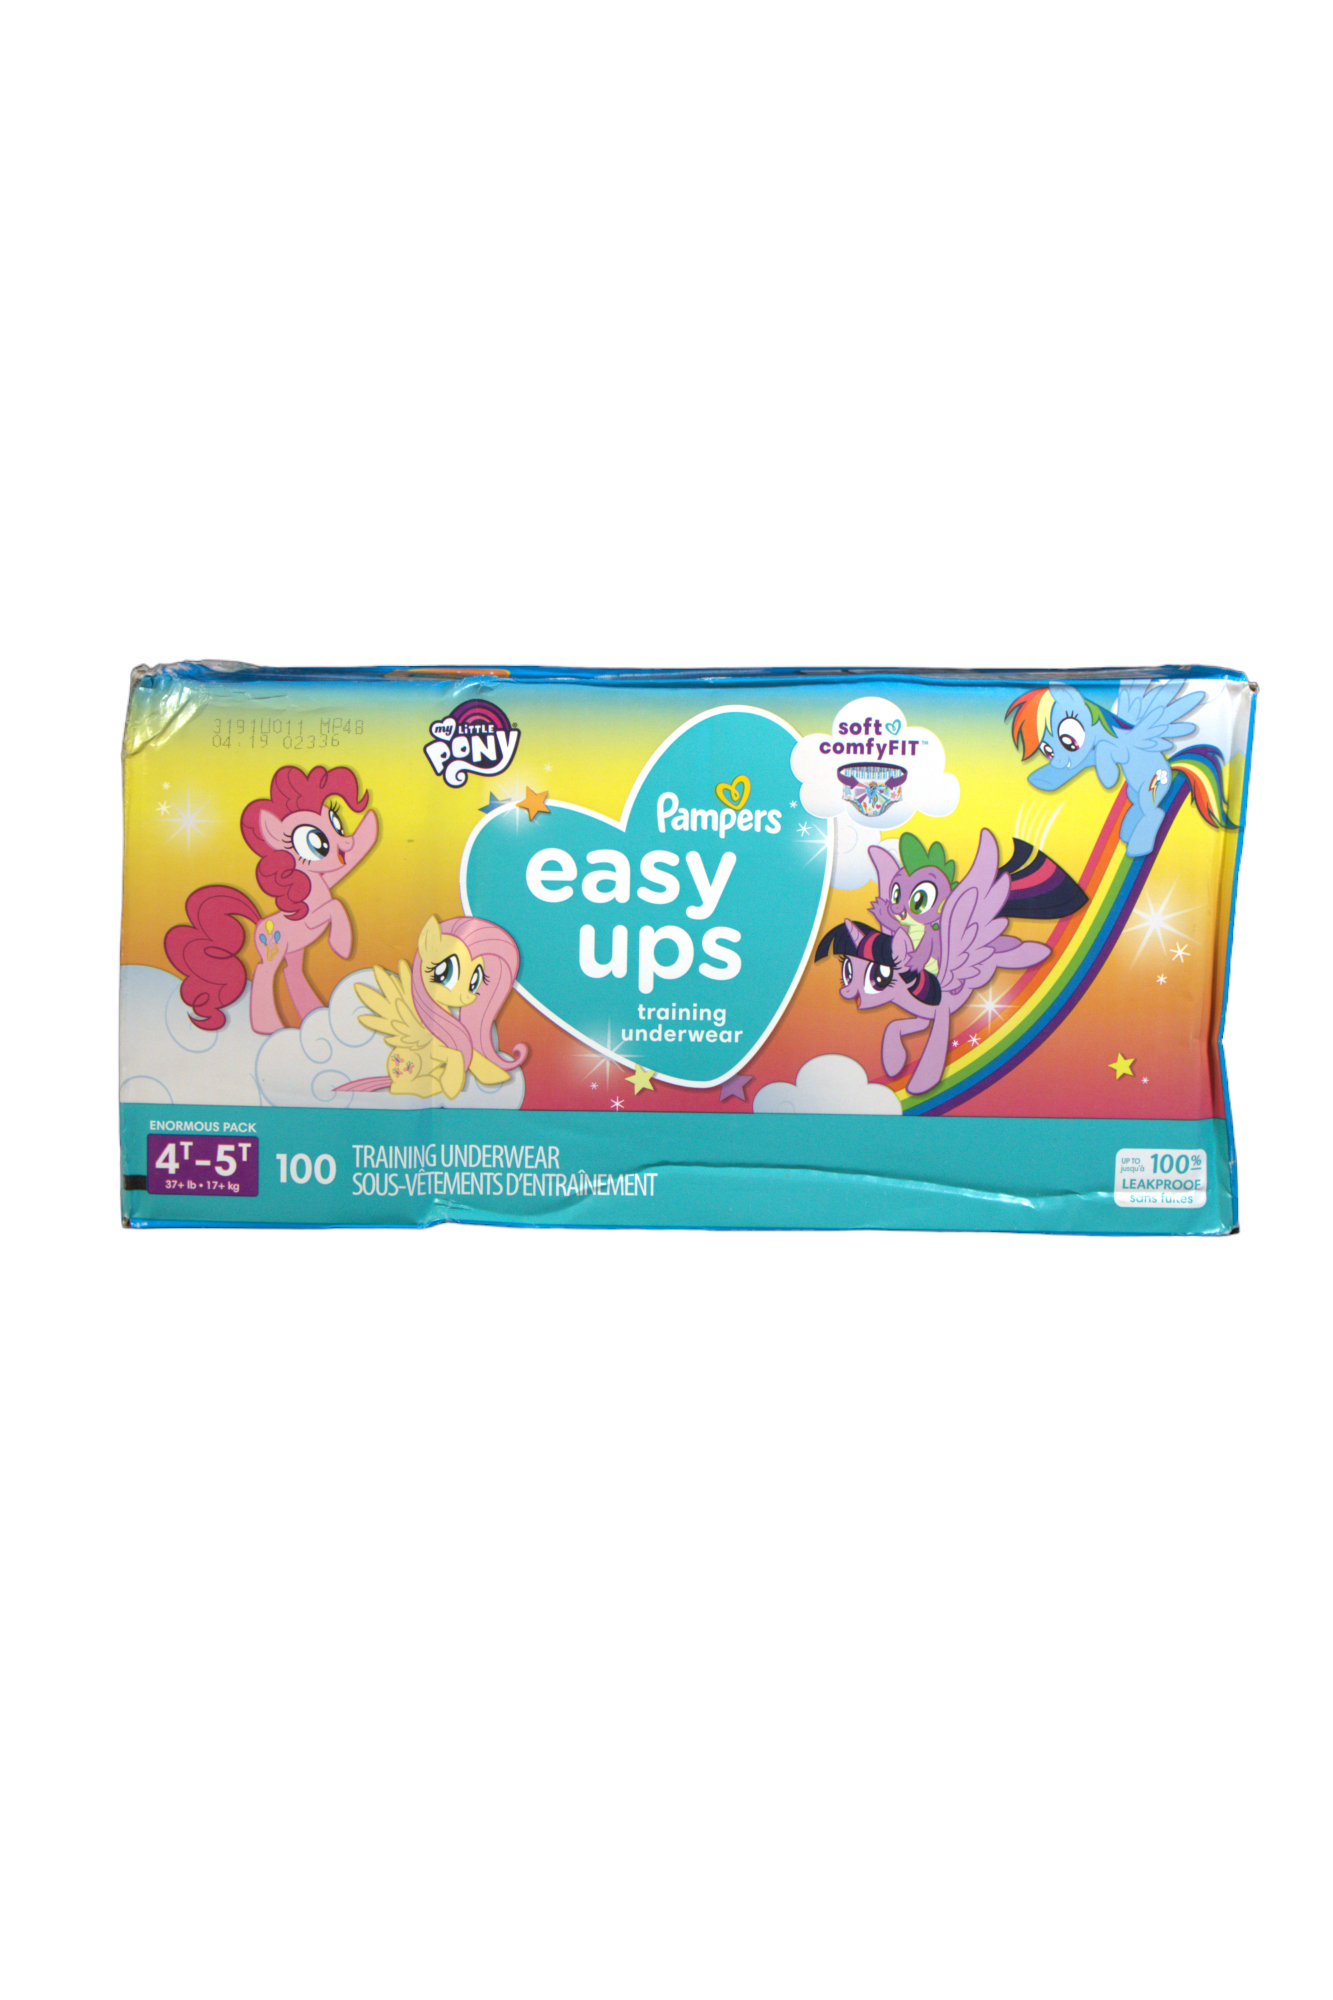 Pampers Easy Ups Training Pants - My Little Pony - Size 4T-5T -100